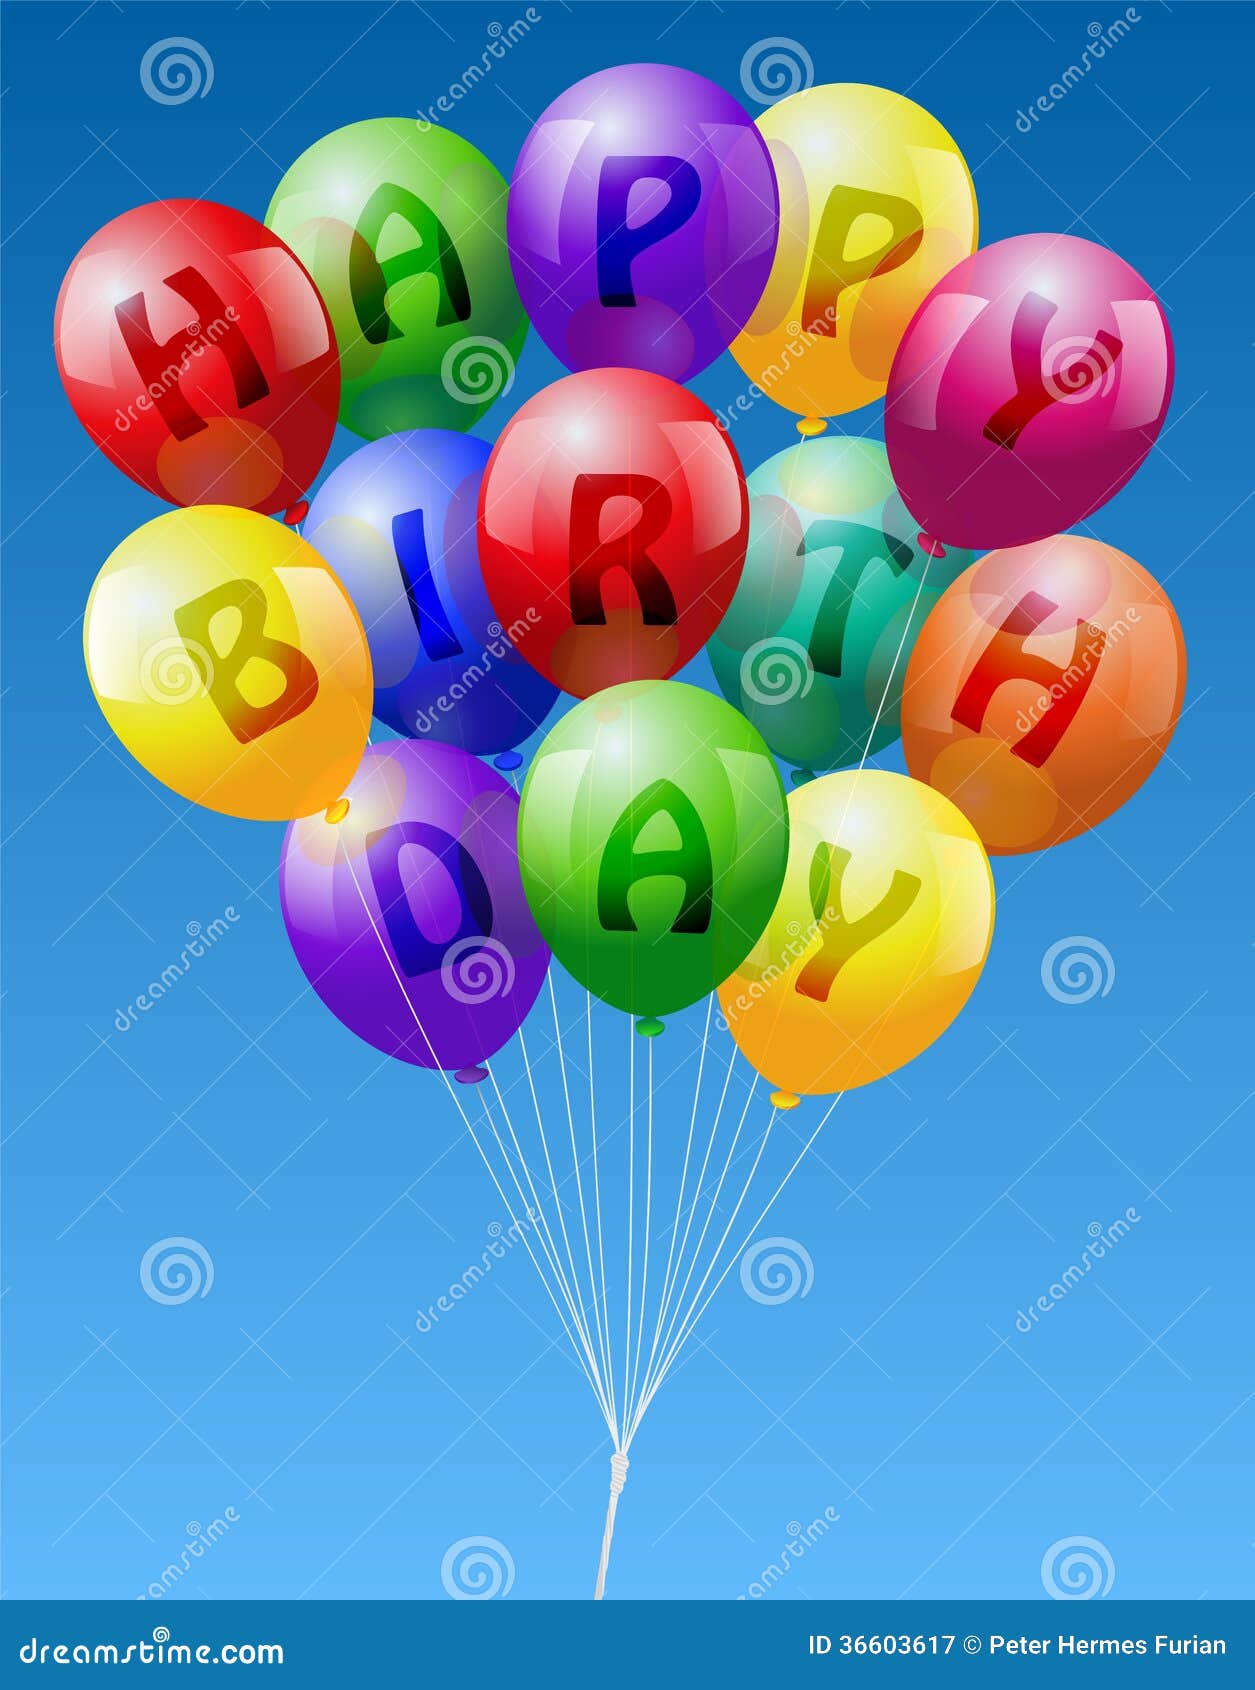 happy-birthday-balloons-bunch-colorful-realistic-looking-lettering-blue-sky-background-36603617.jpg